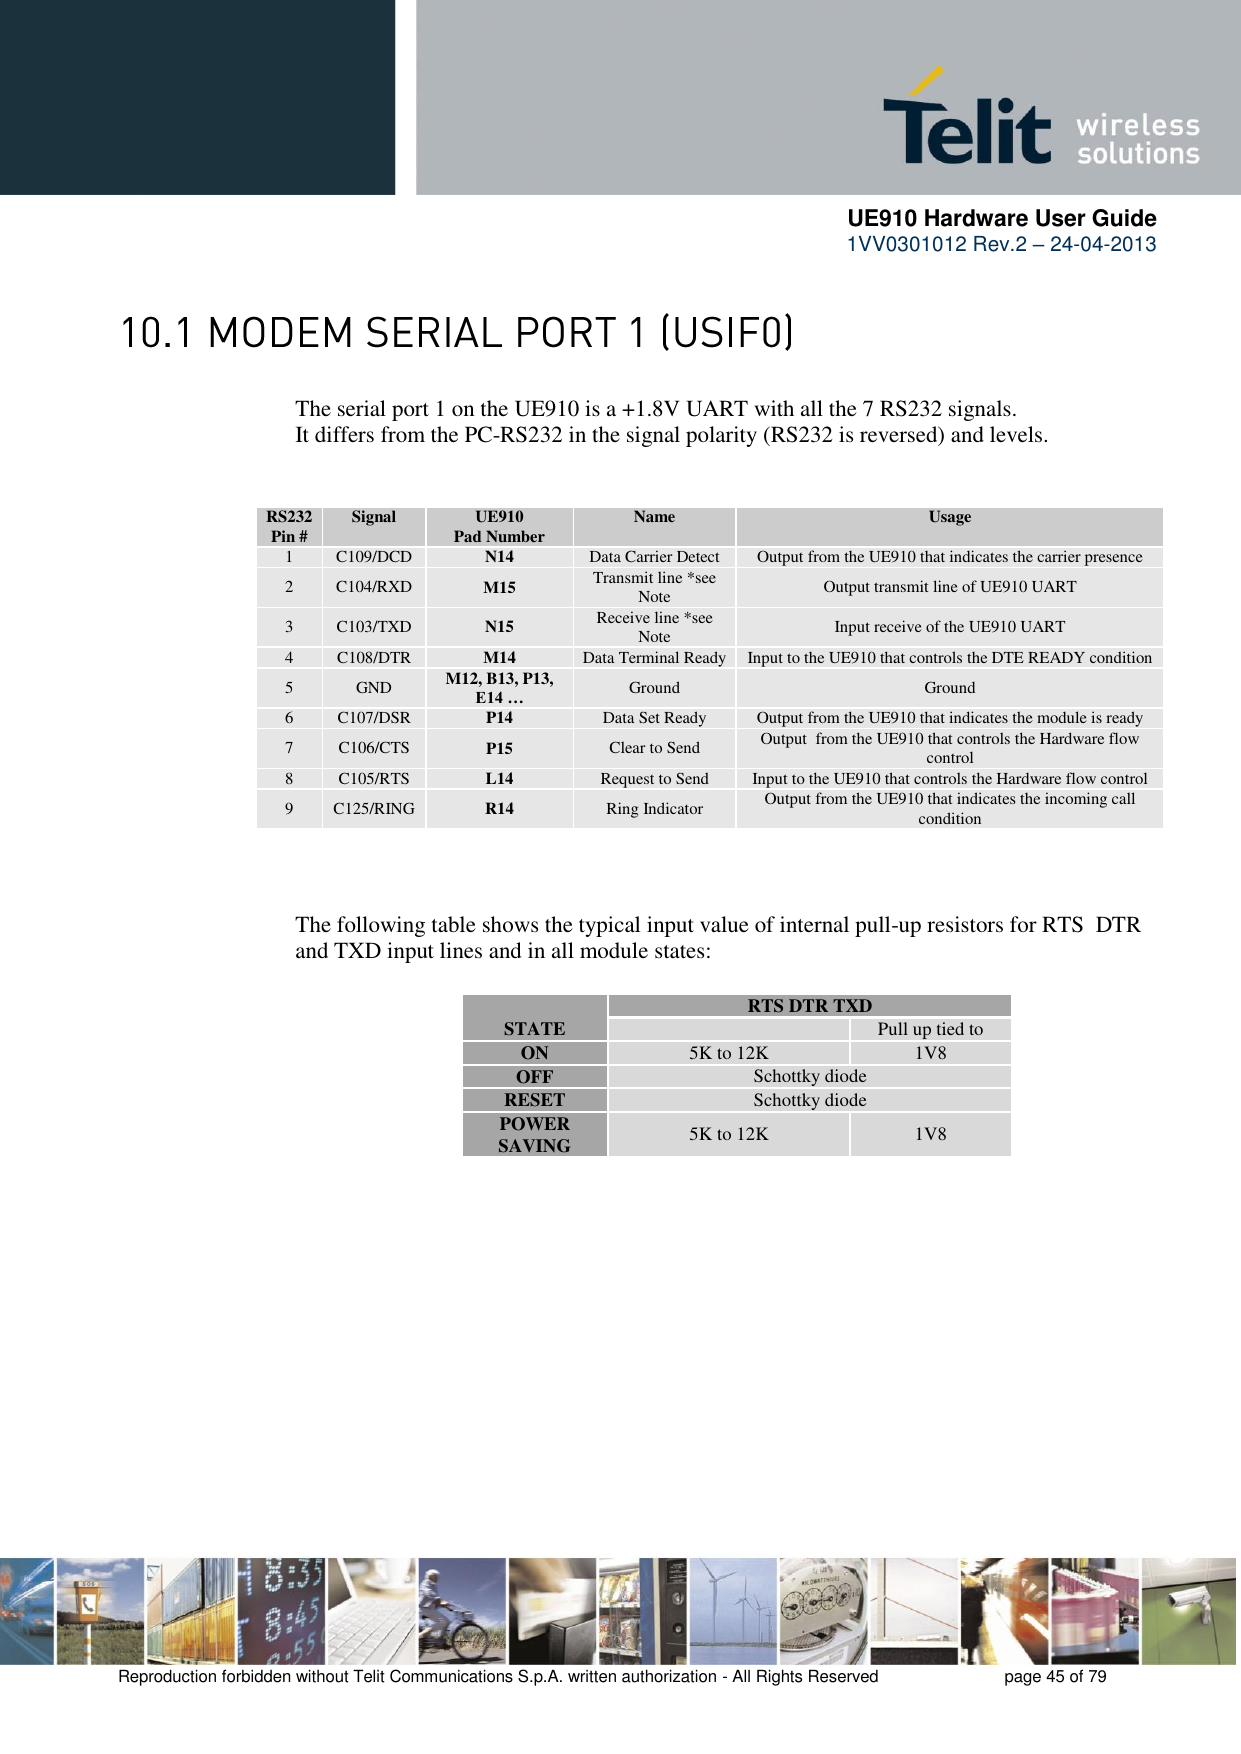      UE910 Hardware User Guide  1VV0301012 Rev.2 – 24-04-2013    Reproduction forbidden without Telit Communications S.p.A. written authorization - All Rights Reserved    page 45 of 79   The serial port 1 on the UE910 is a +1.8V UART with all the 7 RS232 signals.      It differs from the PC-RS232 in the signal polarity (RS232 is reversed) and levels. RS232 Pin # Signal UE910 Pad Number Name Usage 1 C109/DCD N14 Data Carrier Detect Output from the UE910 that indicates the carrier presence 2 C104/RXD M15 Transmit line *see Note Output transmit line of UE910 UART 3 C103/TXD N15 Receive line *see Note Input receive of the UE910 UART 4 C108/DTR M14 Data Terminal Ready Input to the UE910 that controls the DTE READY condition 5 GND M12, B13, P13, E14 … Ground Ground 6 C107/DSR P14 Data Set Ready Output from the UE910 that indicates the module is ready 7 C106/CTS P15 Clear to Send Output  from the UE910 that controls the Hardware flow control 8 C105/RTS L14 Request to Send Input to the UE910 that controls the Hardware flow control 9 C125/RING R14 Ring Indicator Output from the UE910 that indicates the incoming call condition   The following table shows the typical input value of internal pull-up resistors for RTS  DTR and TXD input lines and in all module states:  STATE RTS DTR TXD  Pull up tied to ON 5K to 12K 1V8 OFF Schottky diode RESET Schottky diode POWER SAVING 5K to 12K 1V8 